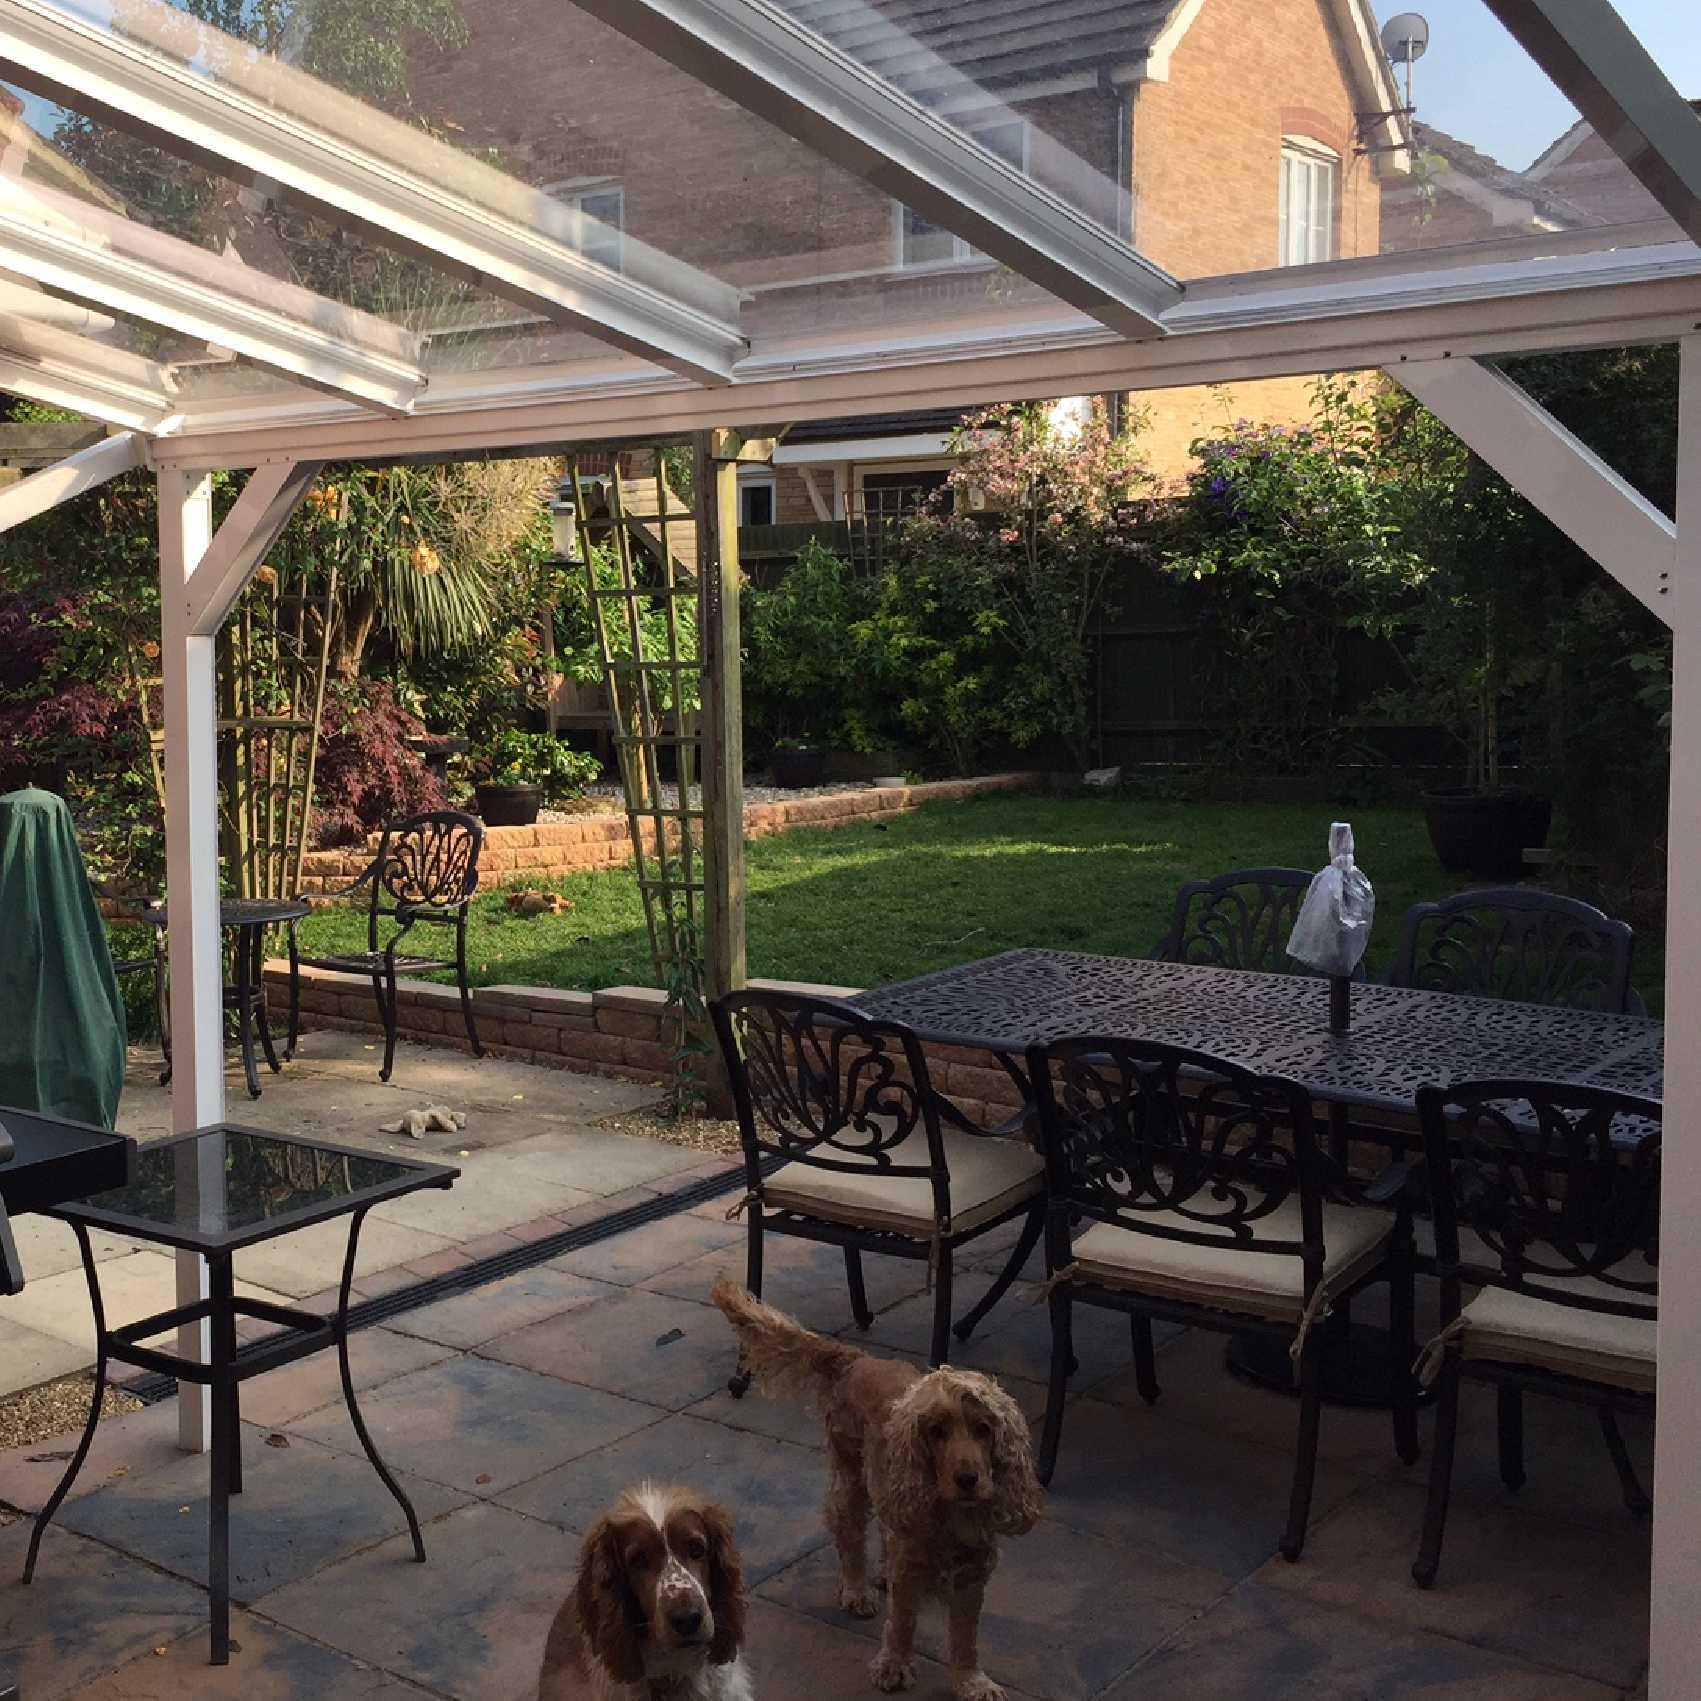 Affordable Omega Smart Lean-To Canopy, White UNGLAZED for 6mm Glazing - 4.9m (W) x 2.5m (P), (3) Supporting Posts